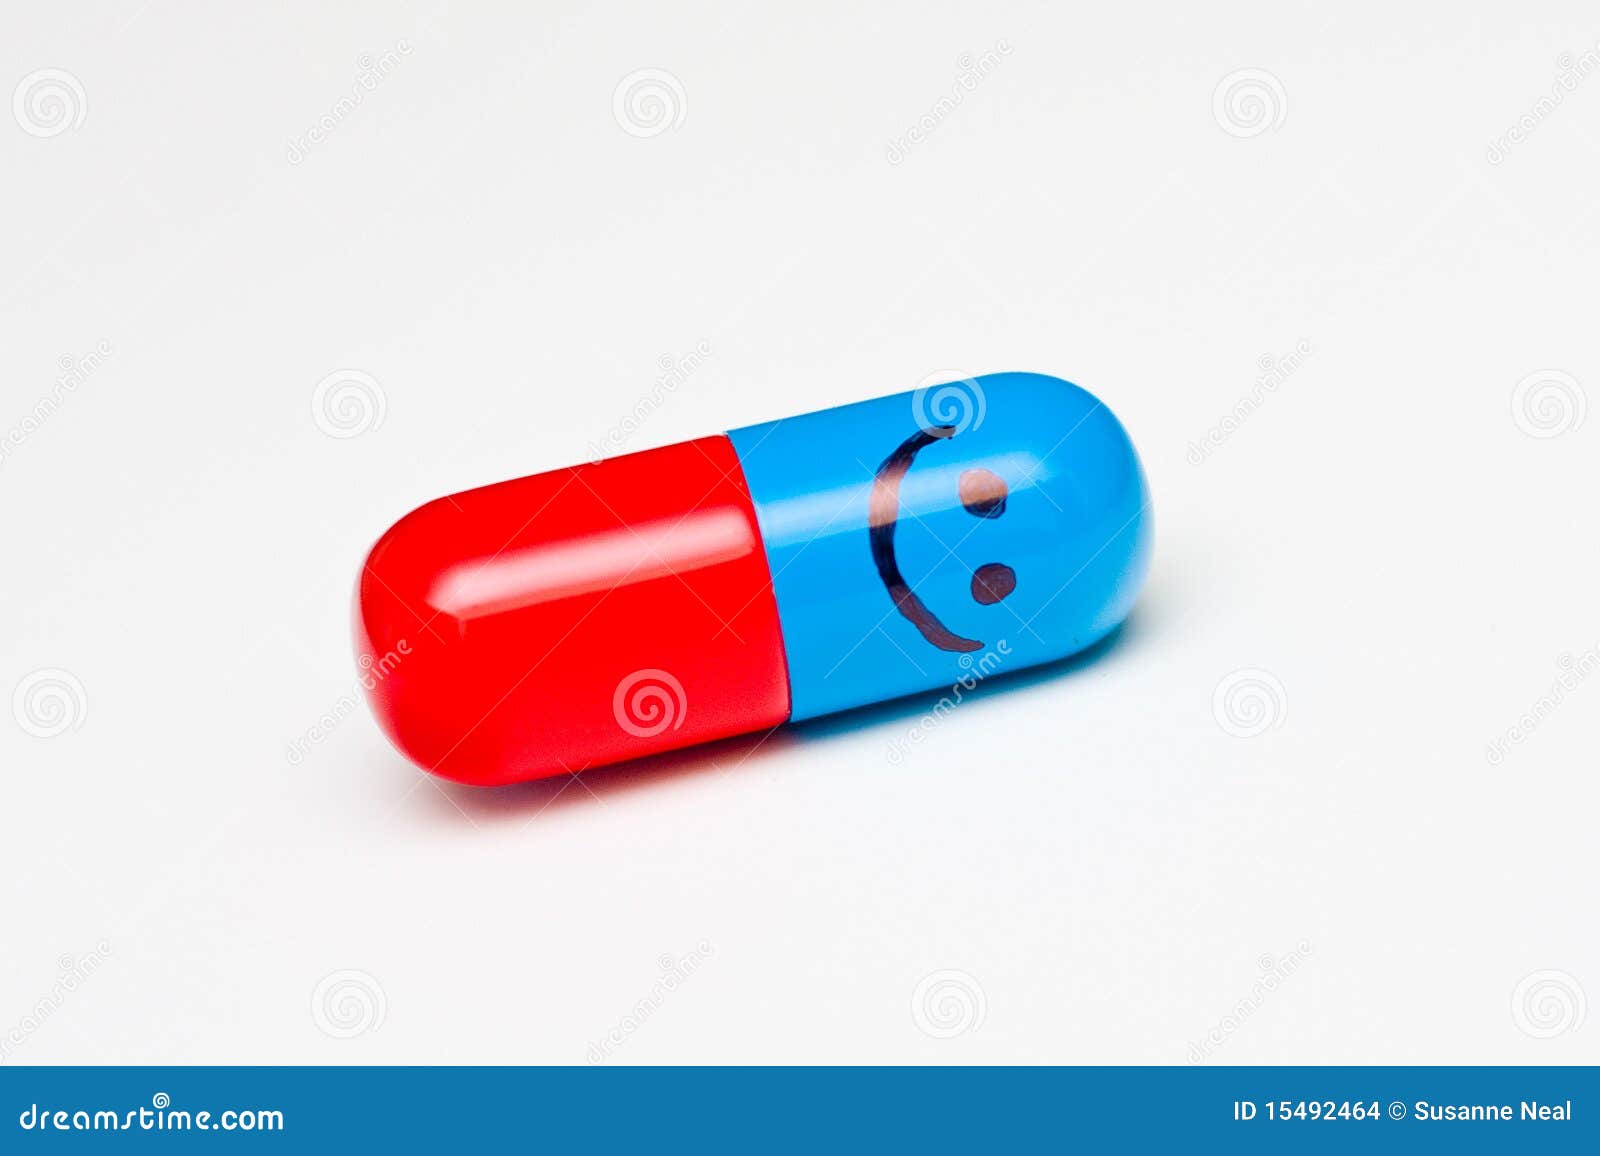 happy pill for depression or anxiety